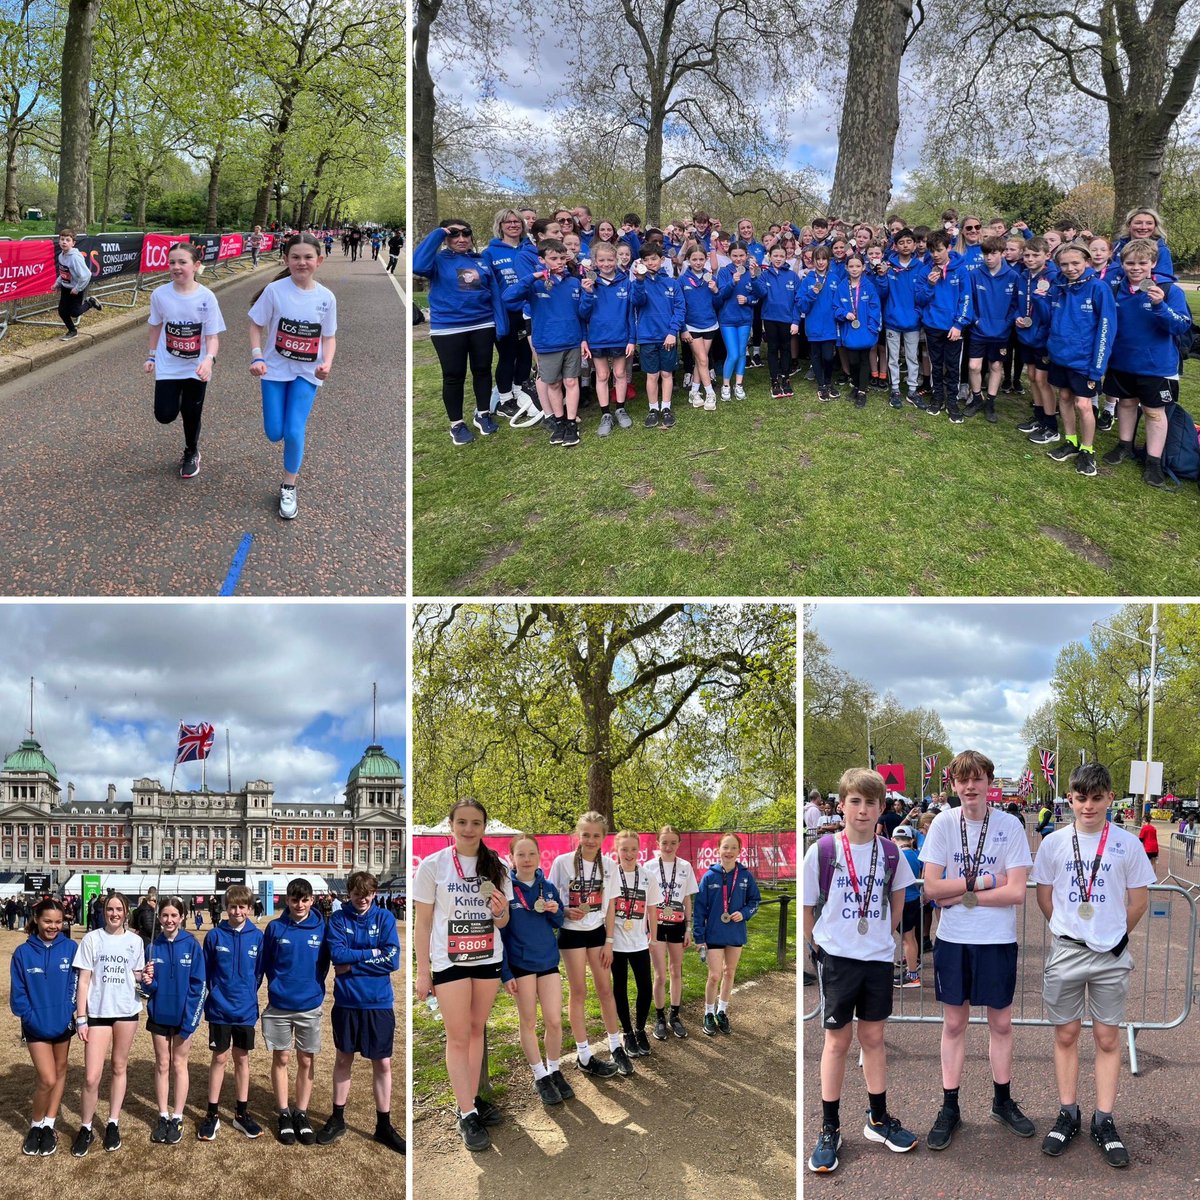 What a wonderful morning for our students. Congratulations to all who took part in the Mini @LondonMarathon. A fantastic experience for all involved. #MiniLondonMarathon @in_mcginty #kNOwKnifeCrime